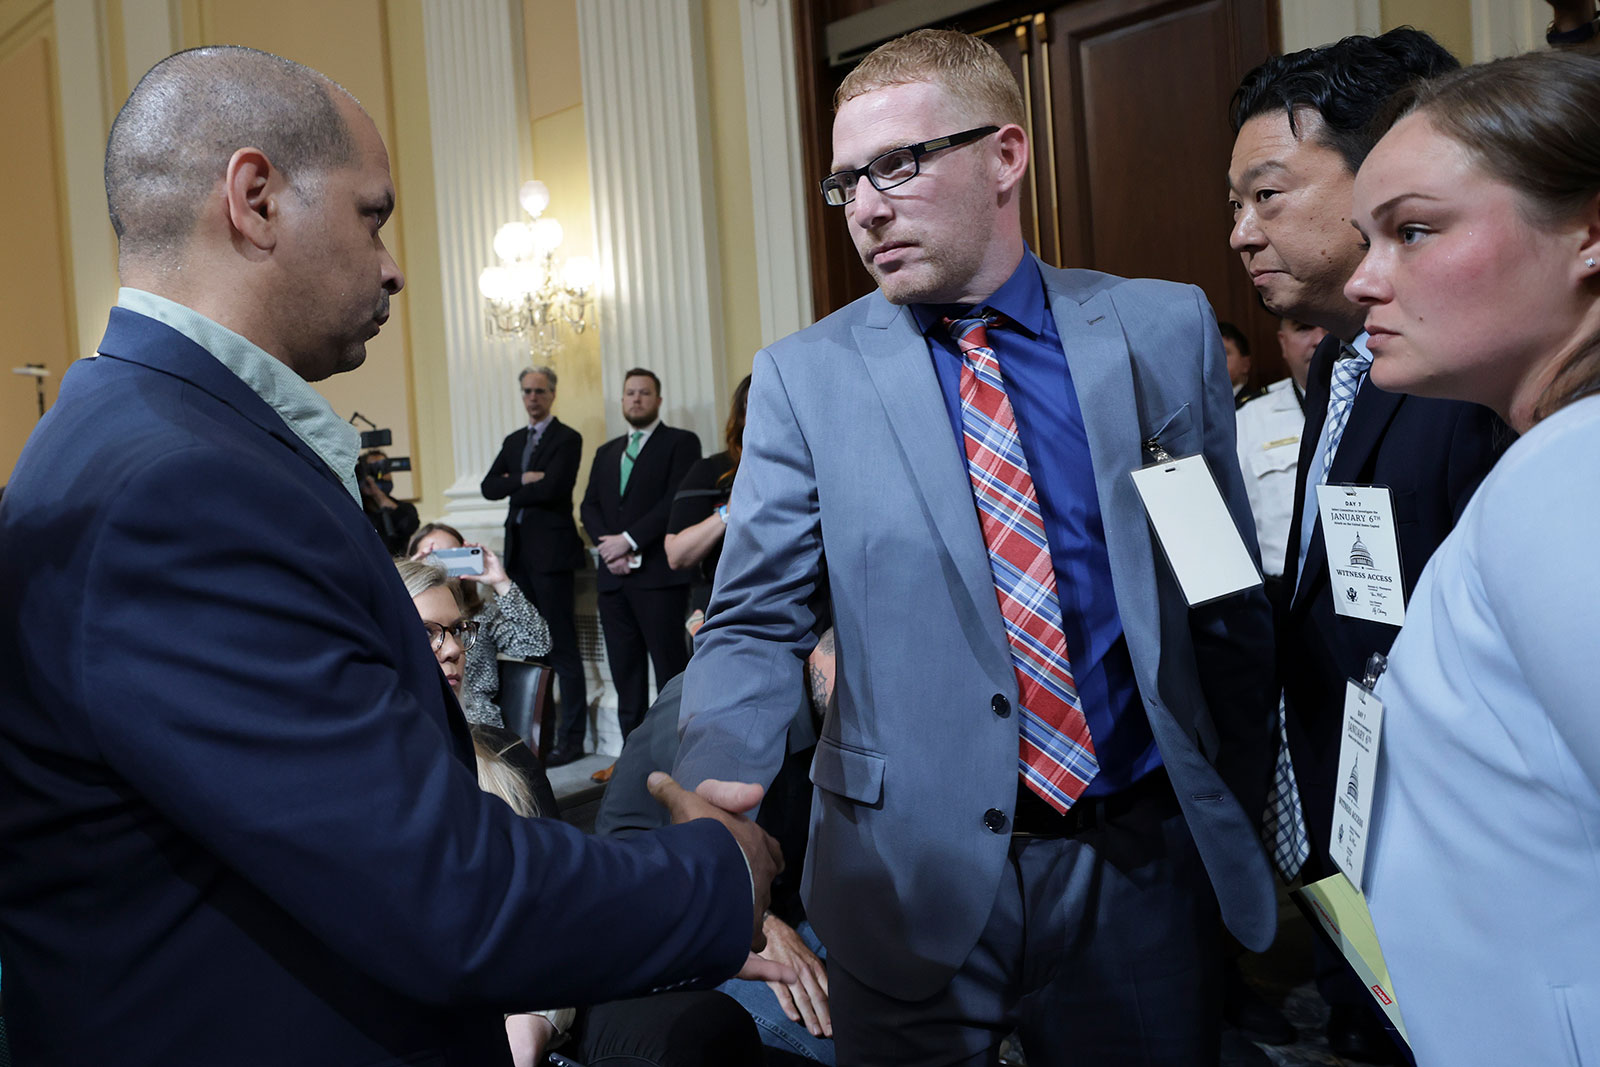 Stephen Ayres, third from right, shakes hands with US Capitol Police Sgt. Aquilino Gonell, left, after the House select committee hearing on July 12. 